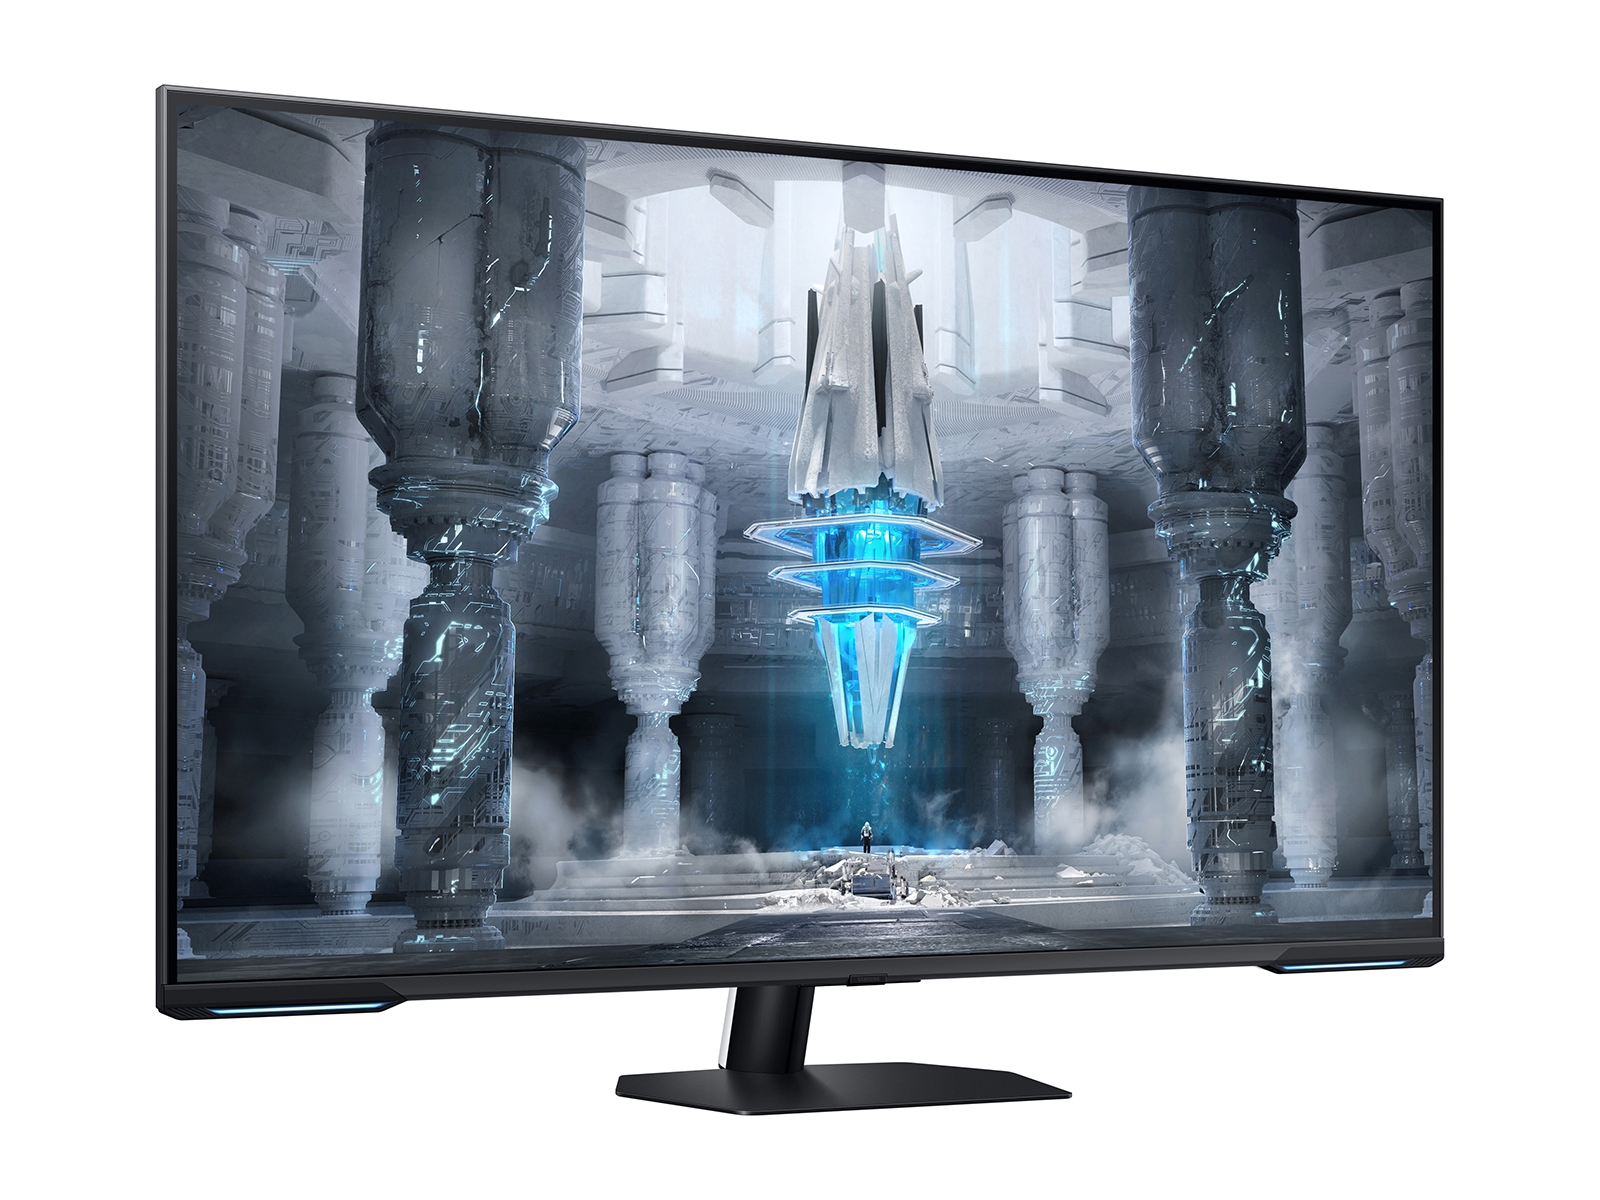 The 7 Best 43-inch Monitor 4K: Gaming and Work